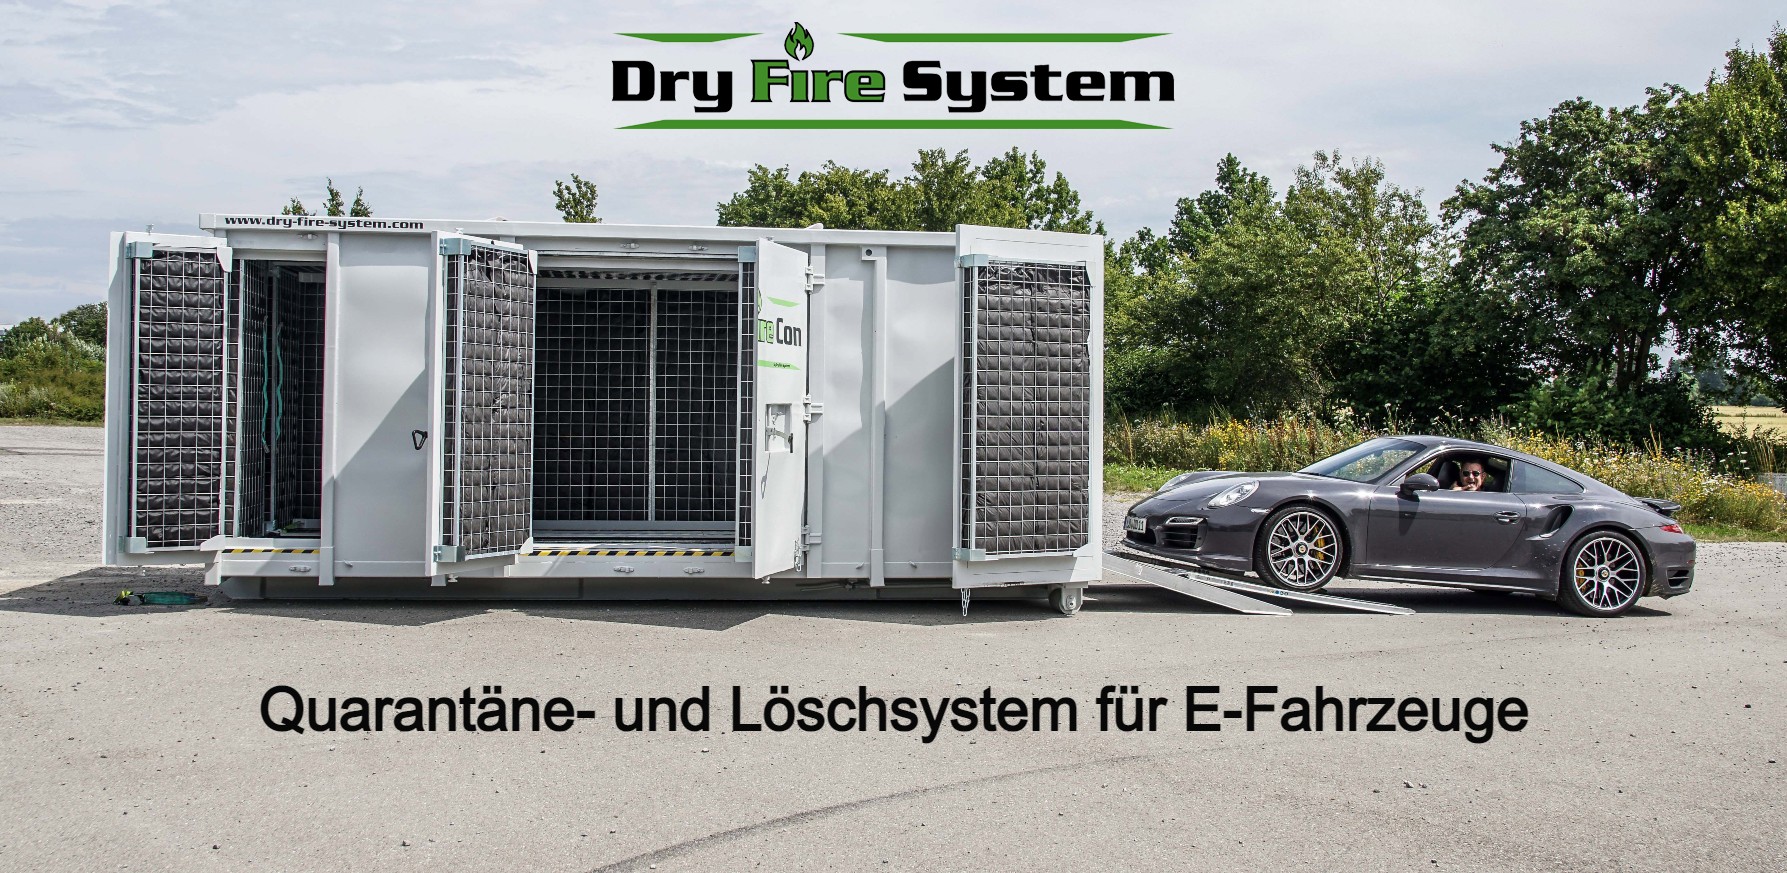 Dry Fire System Container